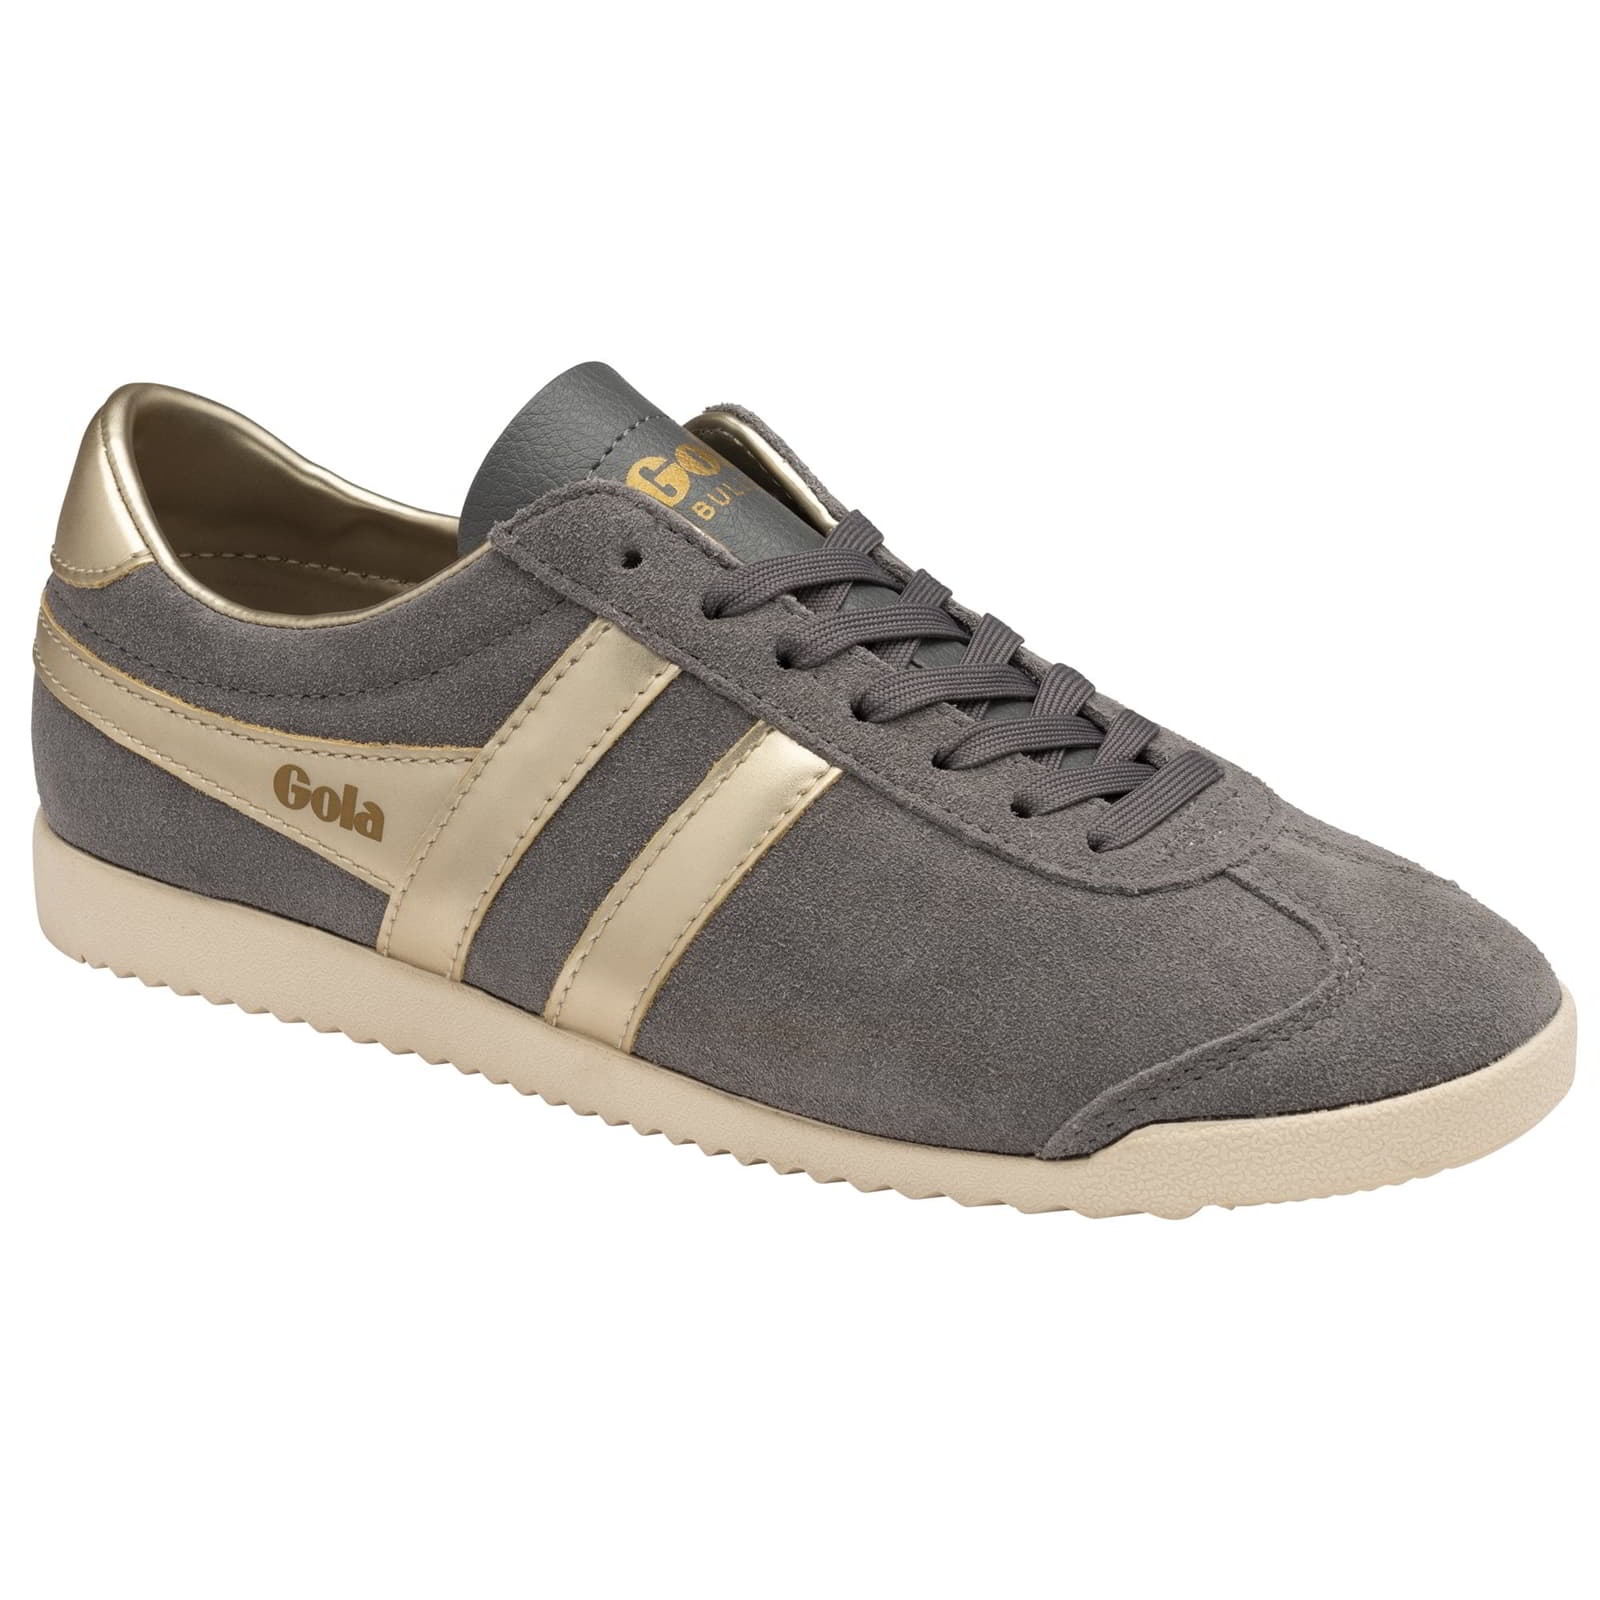 Gola Women's Bullet Pearl Classics Suede Trainers Shoes - UK 5